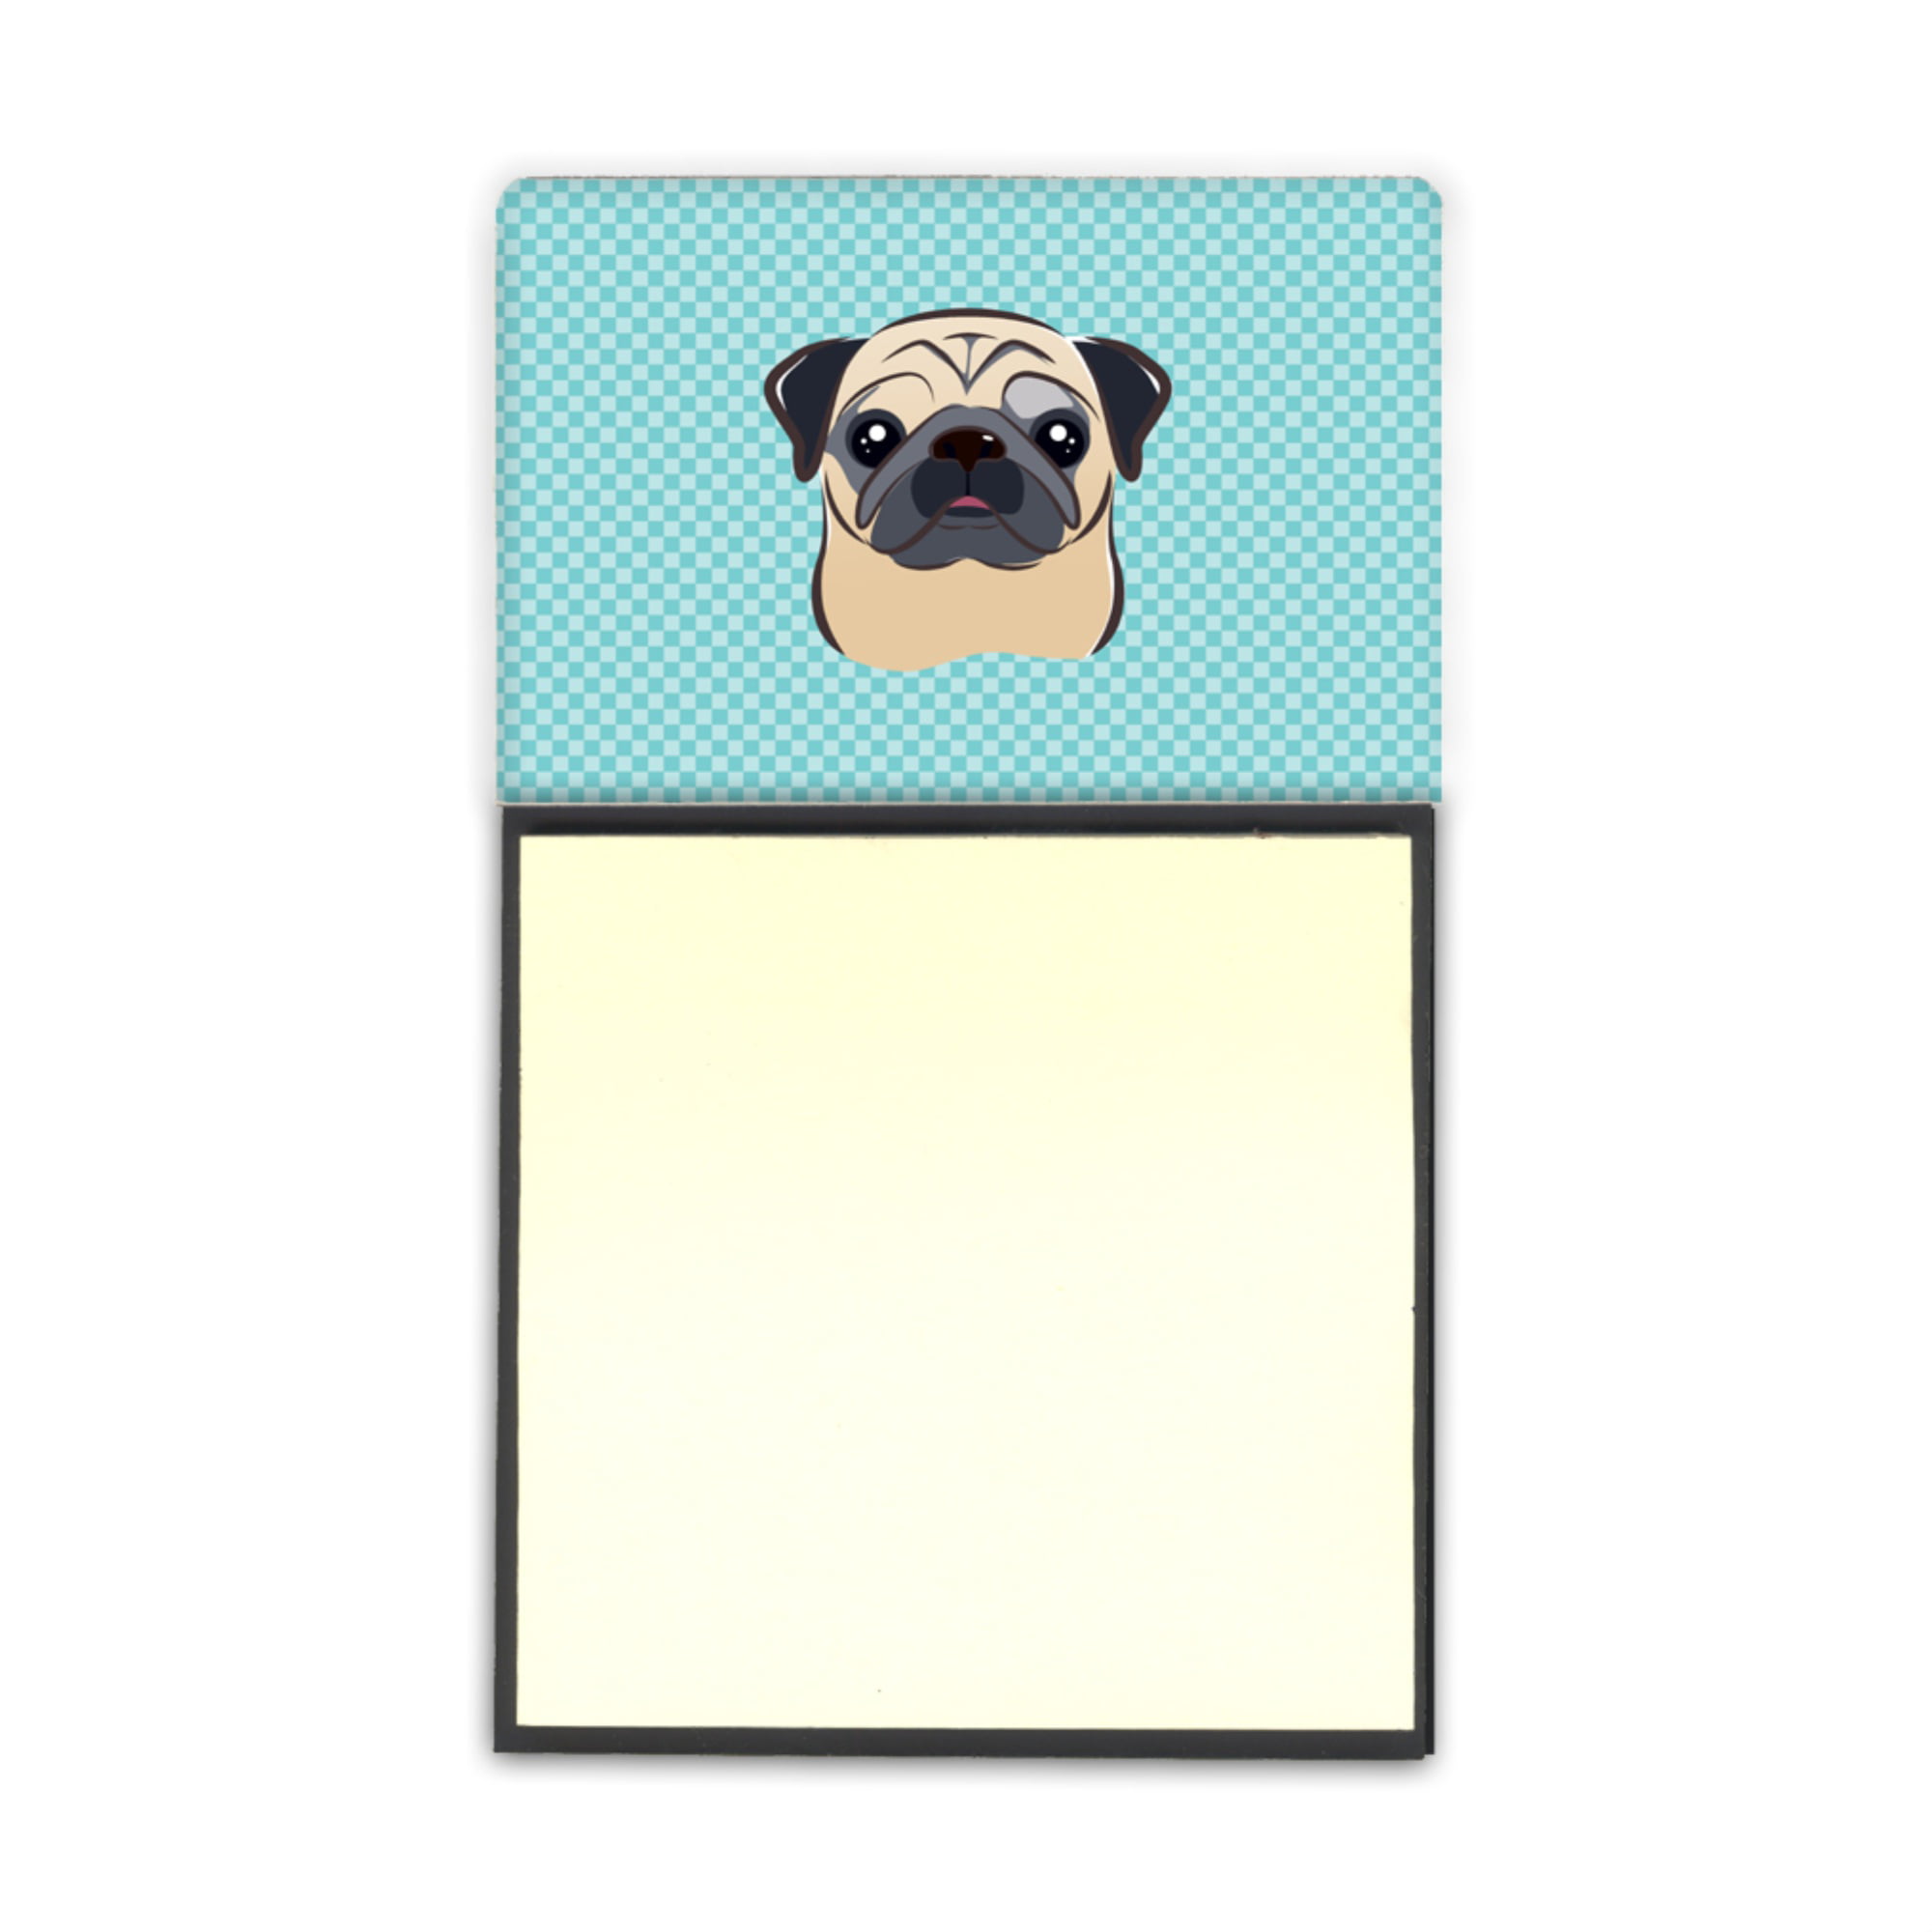 3.25 by 5.5 Multicolor Carolines Treasures English Bulldog Refillable Sticky Note Holder or Postit Note Dispenser